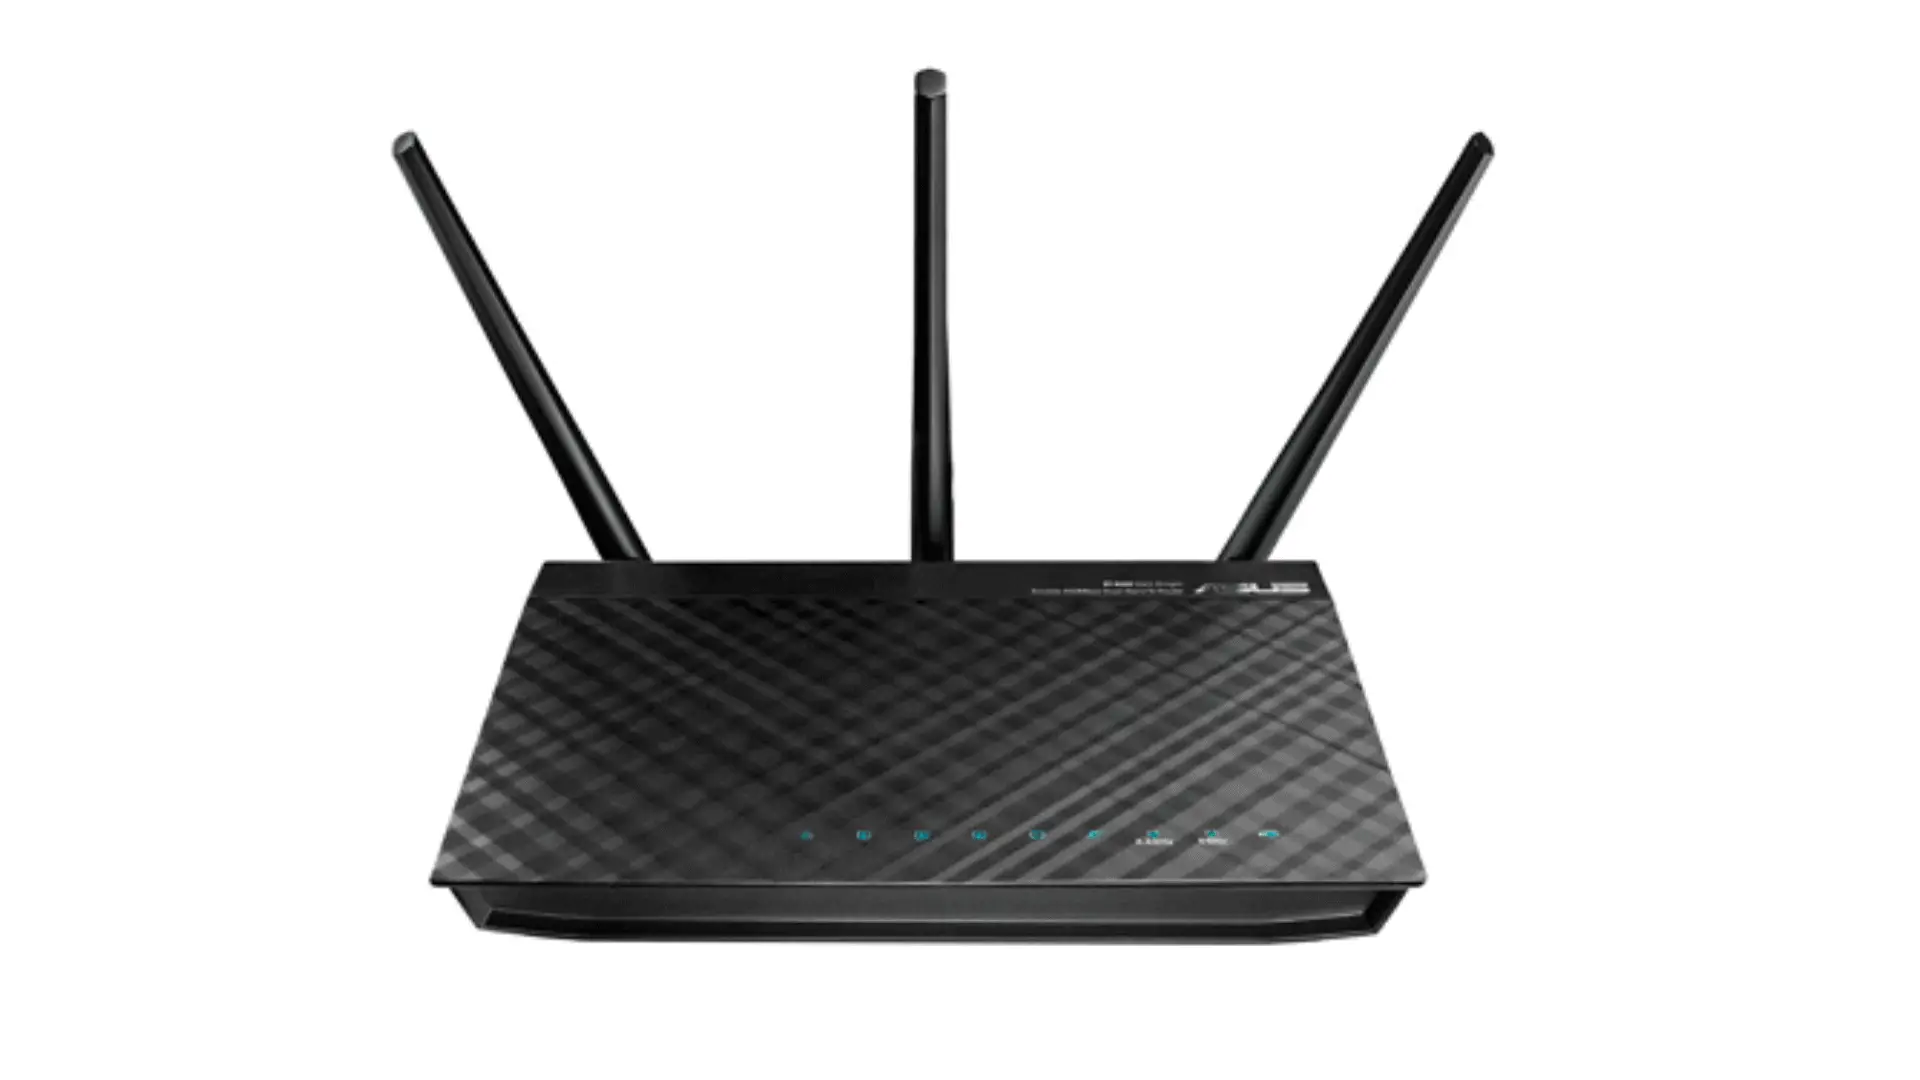 Asus RT-N66U Router with three antennas